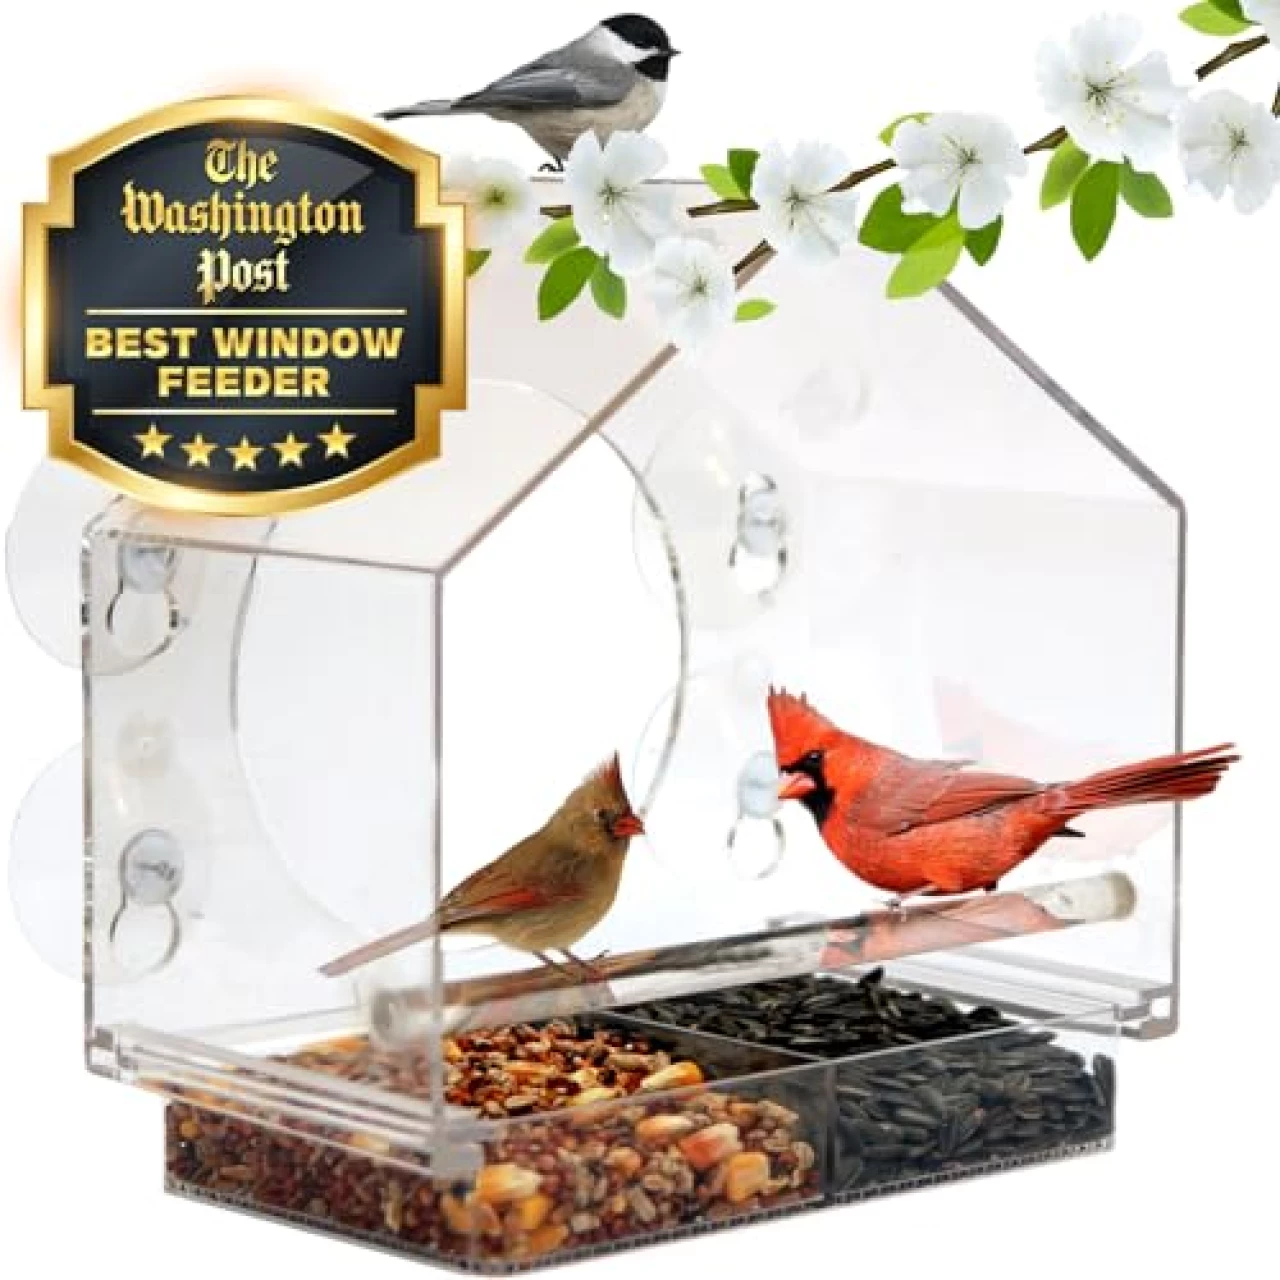 Nature Anywhere Transparent Acrylic Window Bird Feeder - Enhanced Suction Grip, Bird Watching for Cats, Easy-to-Clean, Outdoor Birdhouse - Perfect for Garden, Yard, &amp; Elderly Viewing